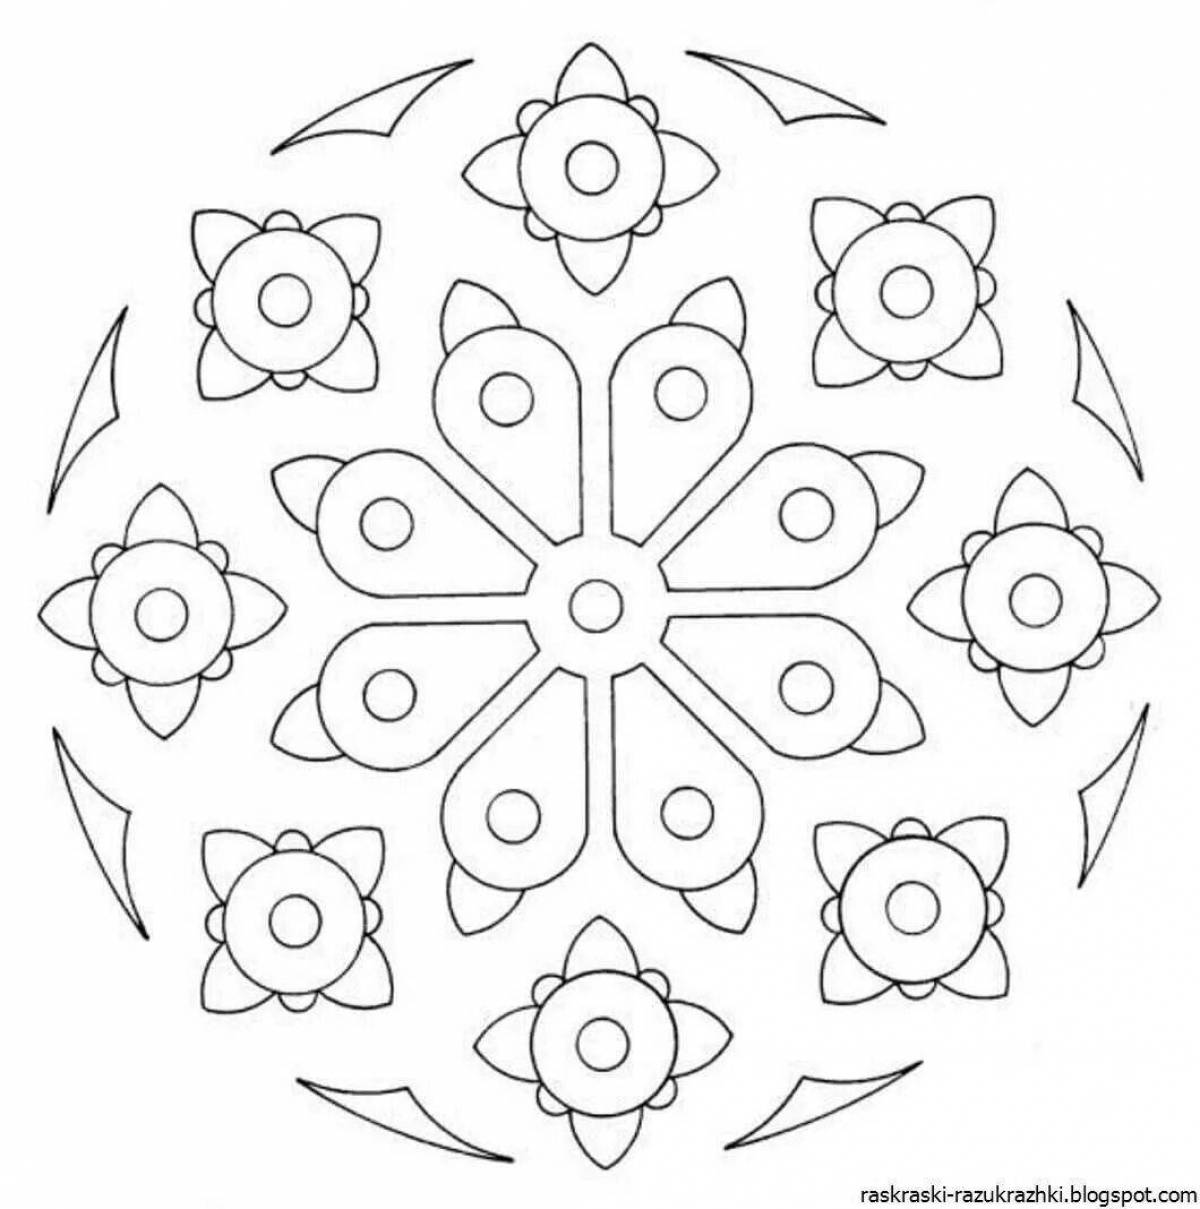 Artistic coloring templates